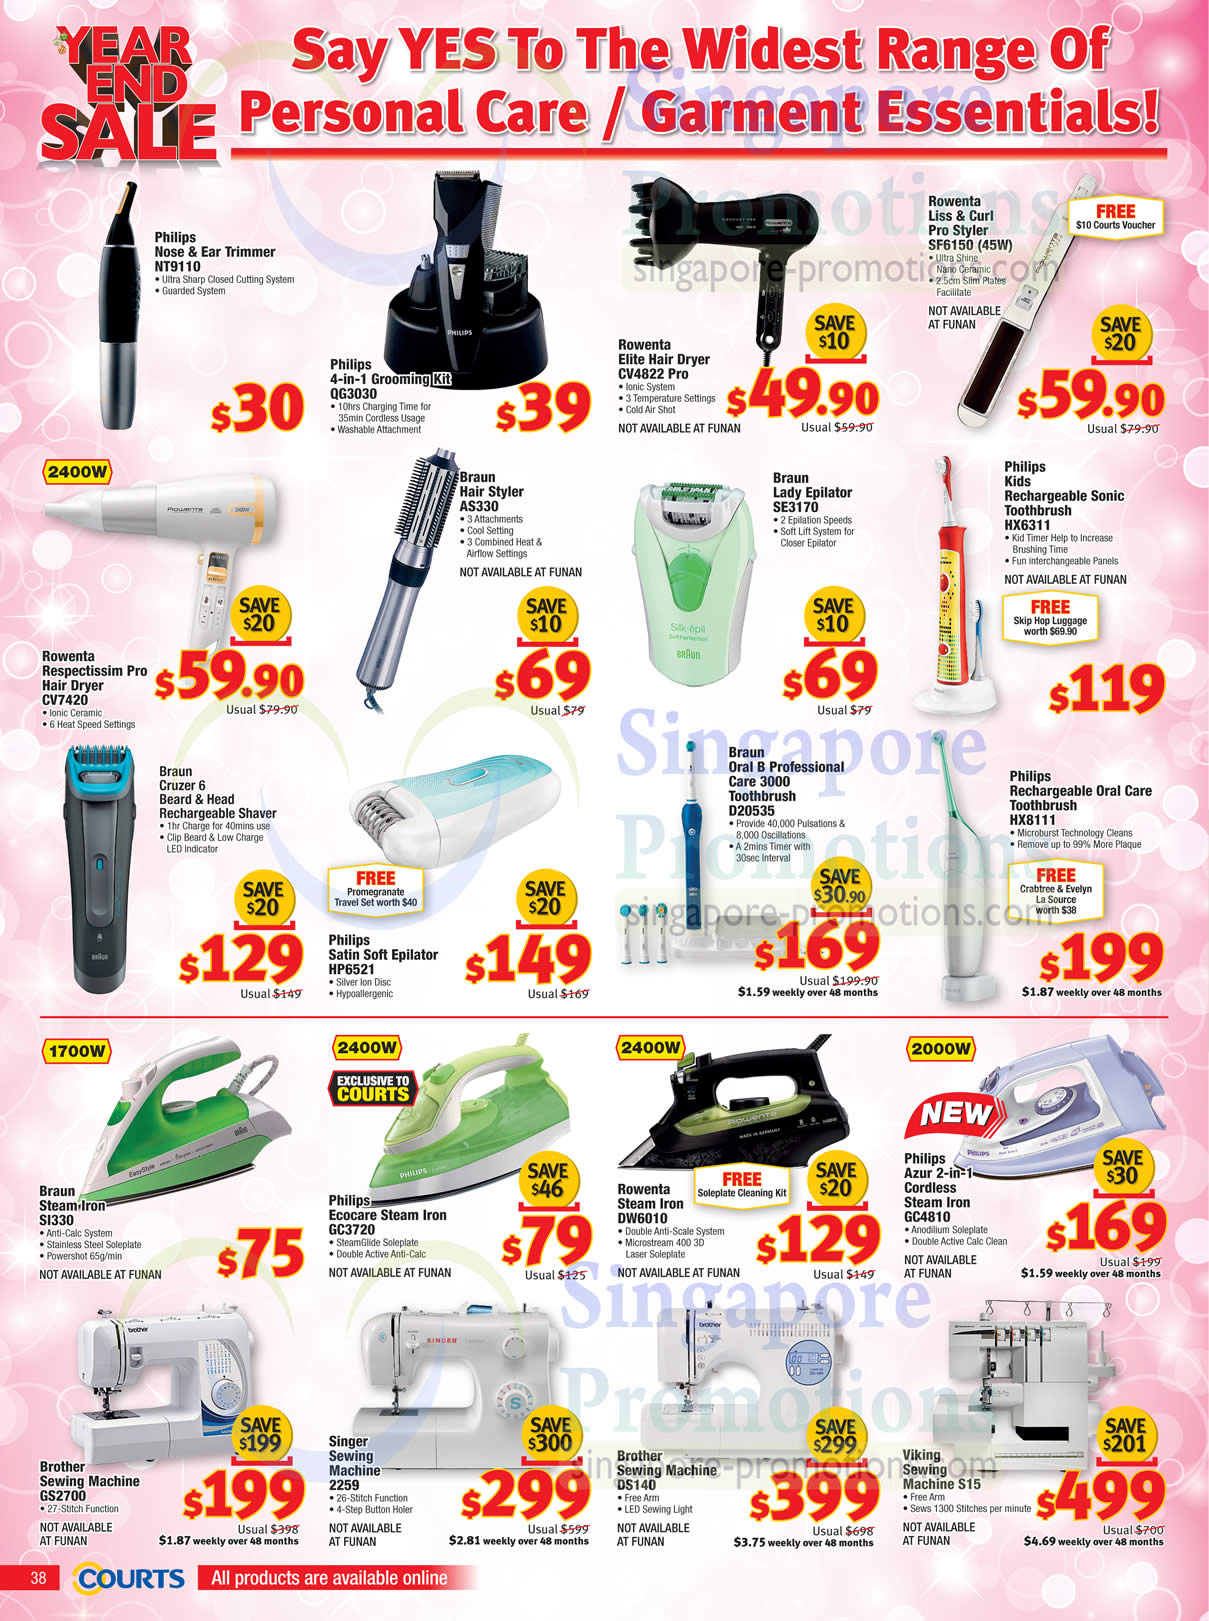 Philips Nose and Ear Trimmer, Philips Grooming Kit, Rowenta Pro Elite Hair  Dryer, Rowenta Liss and Curl Pro Styler, Rowenta Respectissim Pro Hair  Dryer, Braun Hair Styler » Courts 2012 Year End